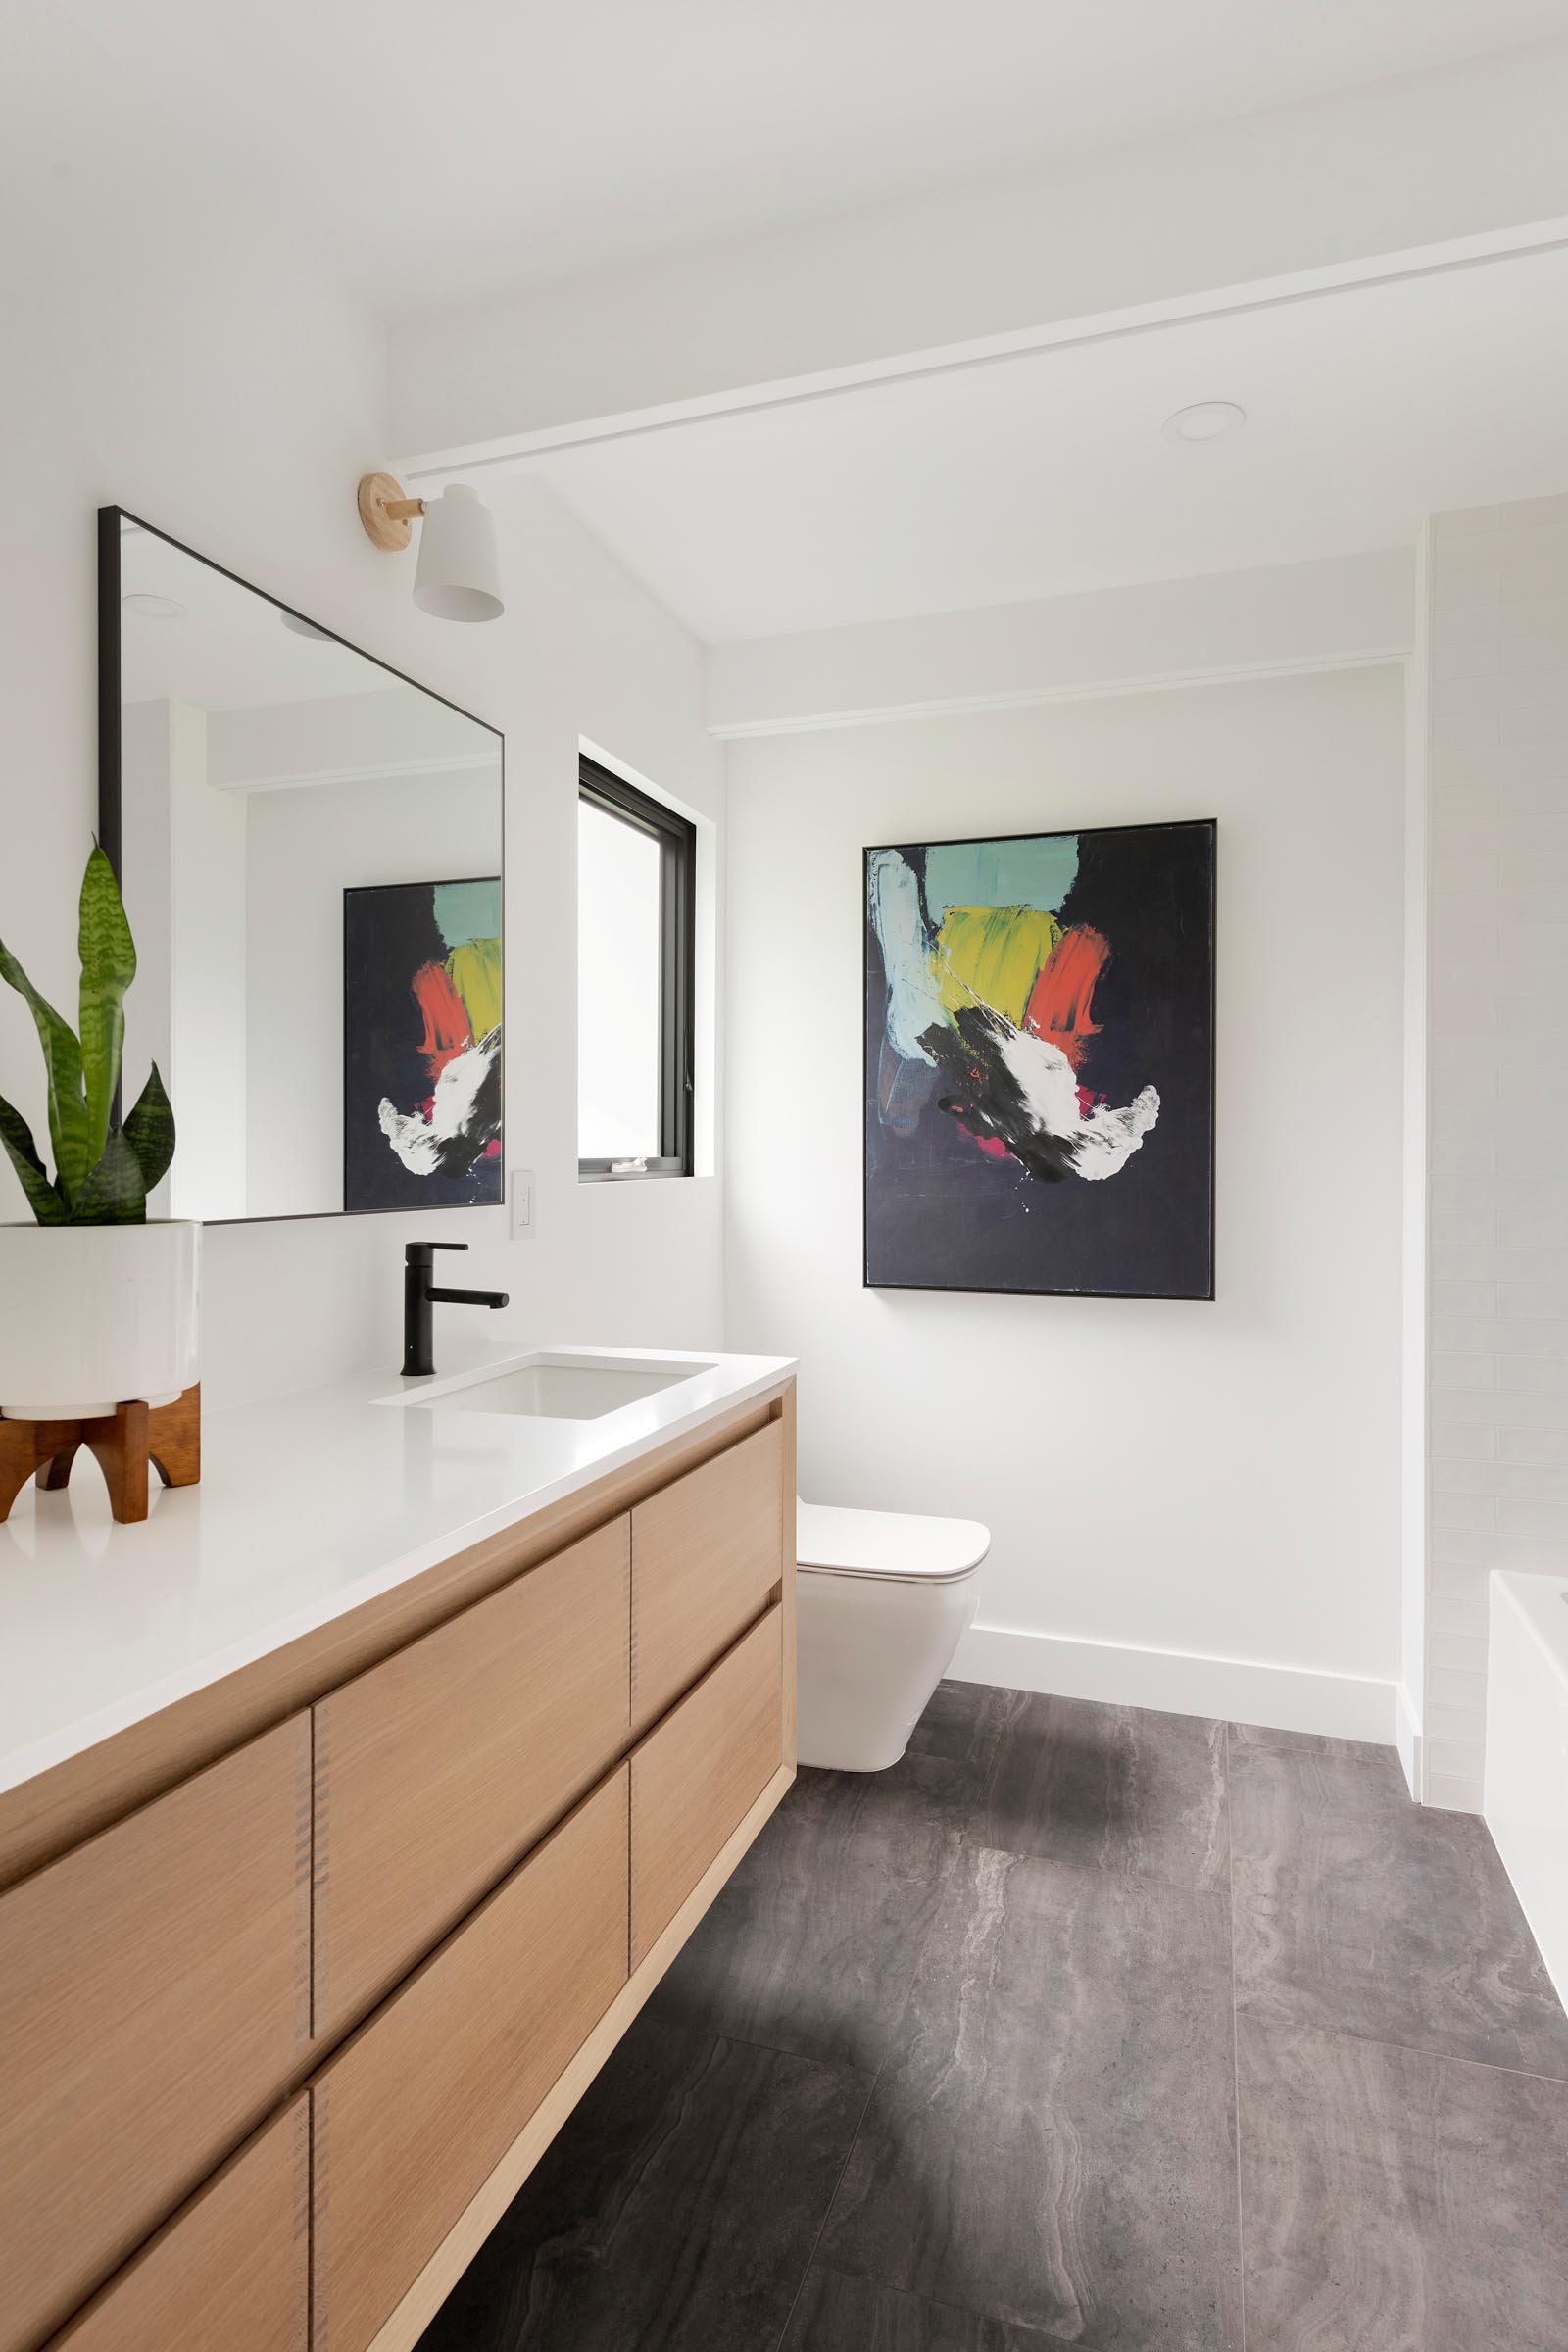 In this modern bathroom, white walls and a light wood vanity keep the space bright, and artwork adds a colorful element.